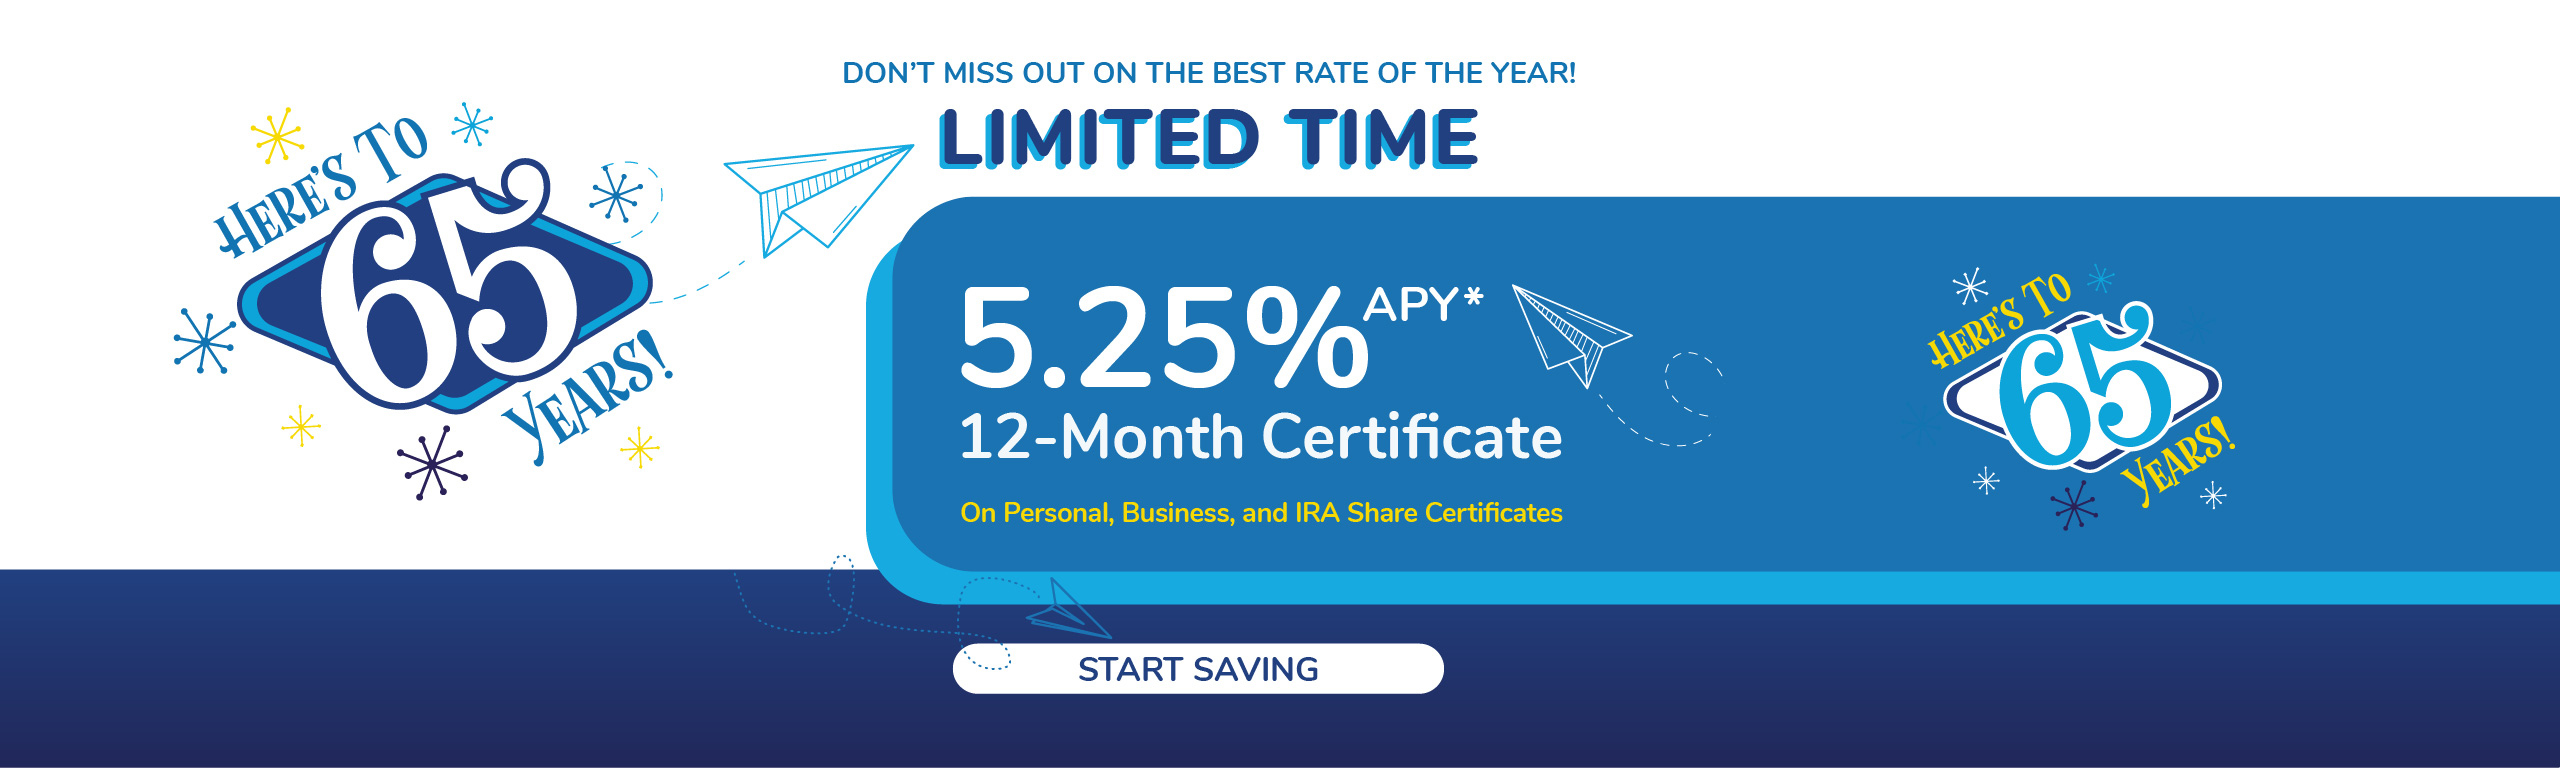 DON’T MISS OUT ON THE BEST RATE OF THE YEAR! LIMITED TIME SHARE CERTIFICATE